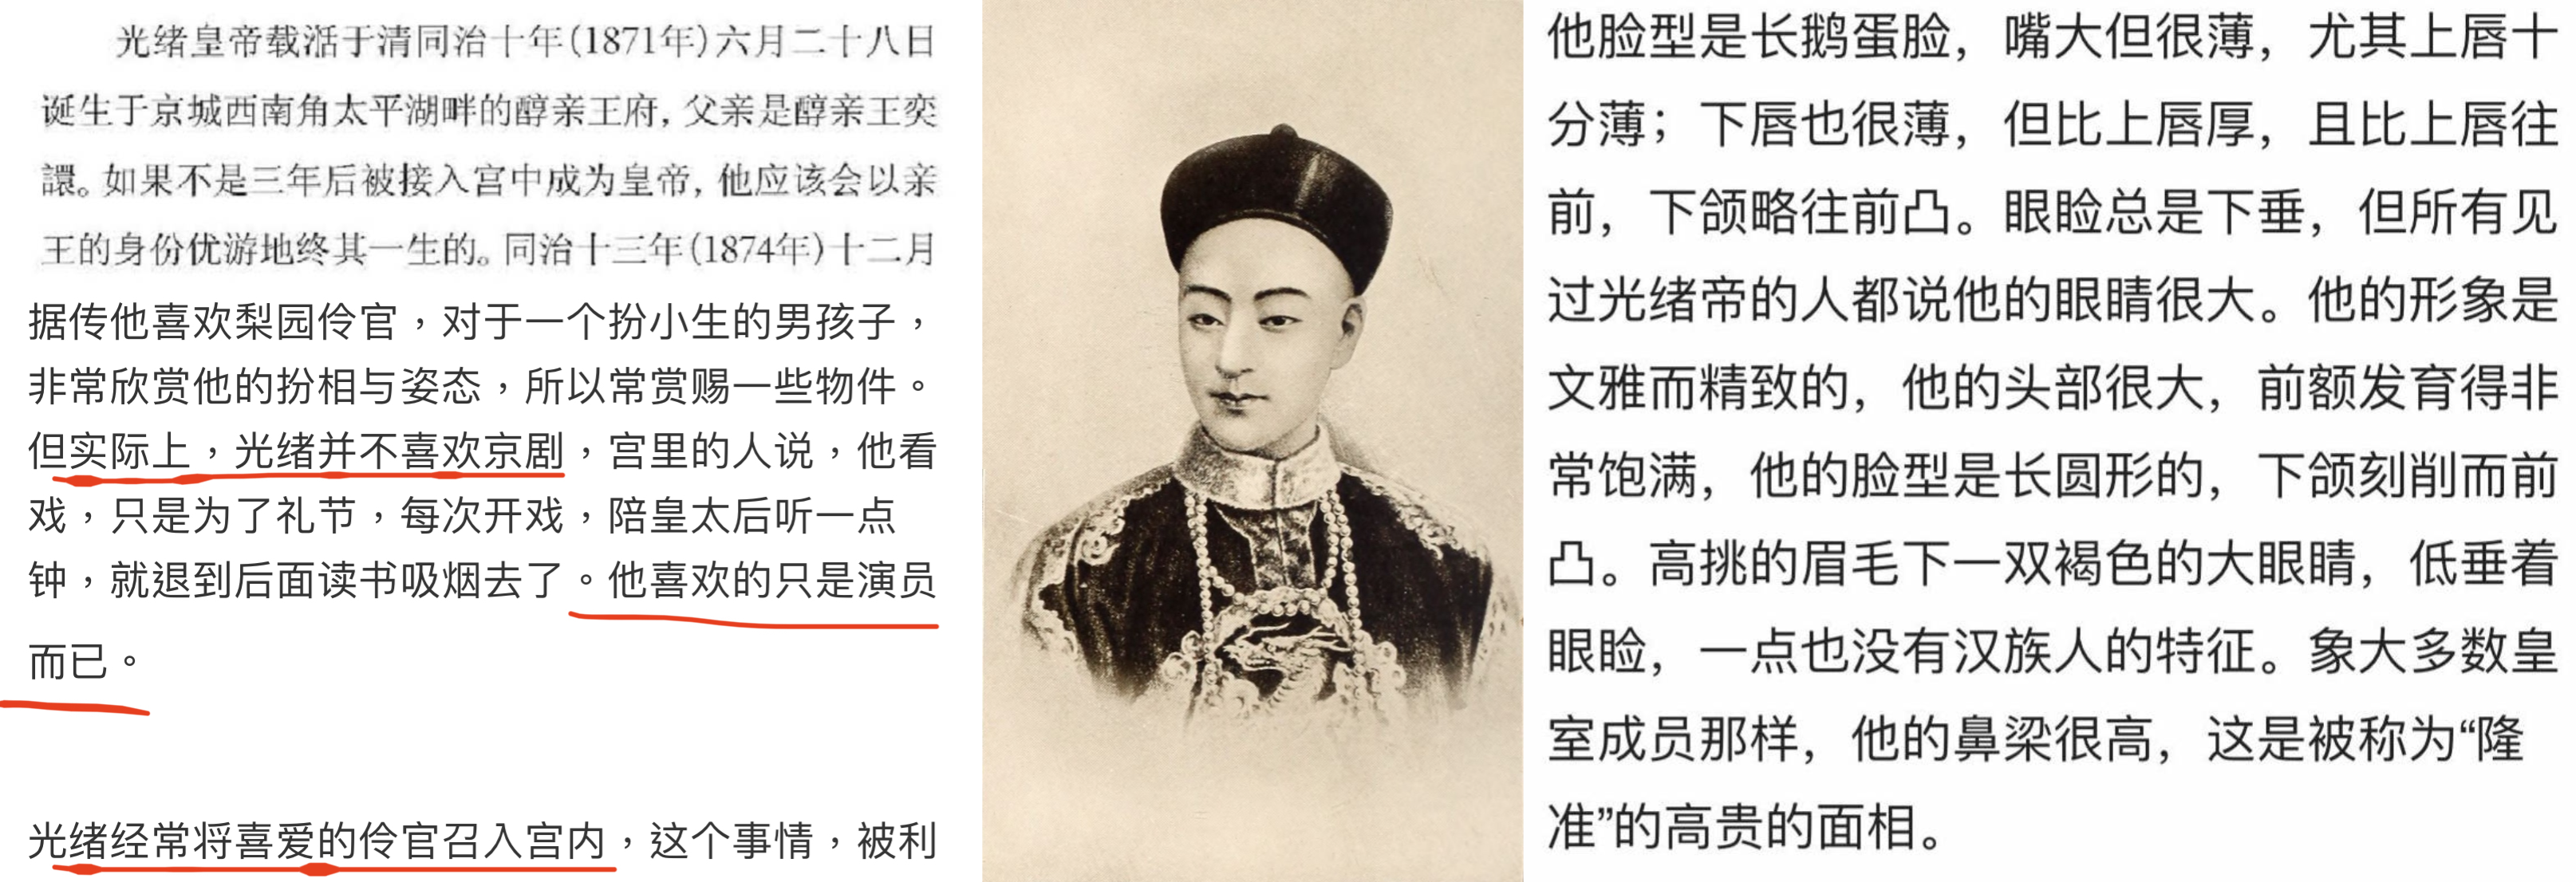 A sepia photograph of the Guangxu emperor, with text in Chinese either side of it. Some lines in the text have been underlined in red.